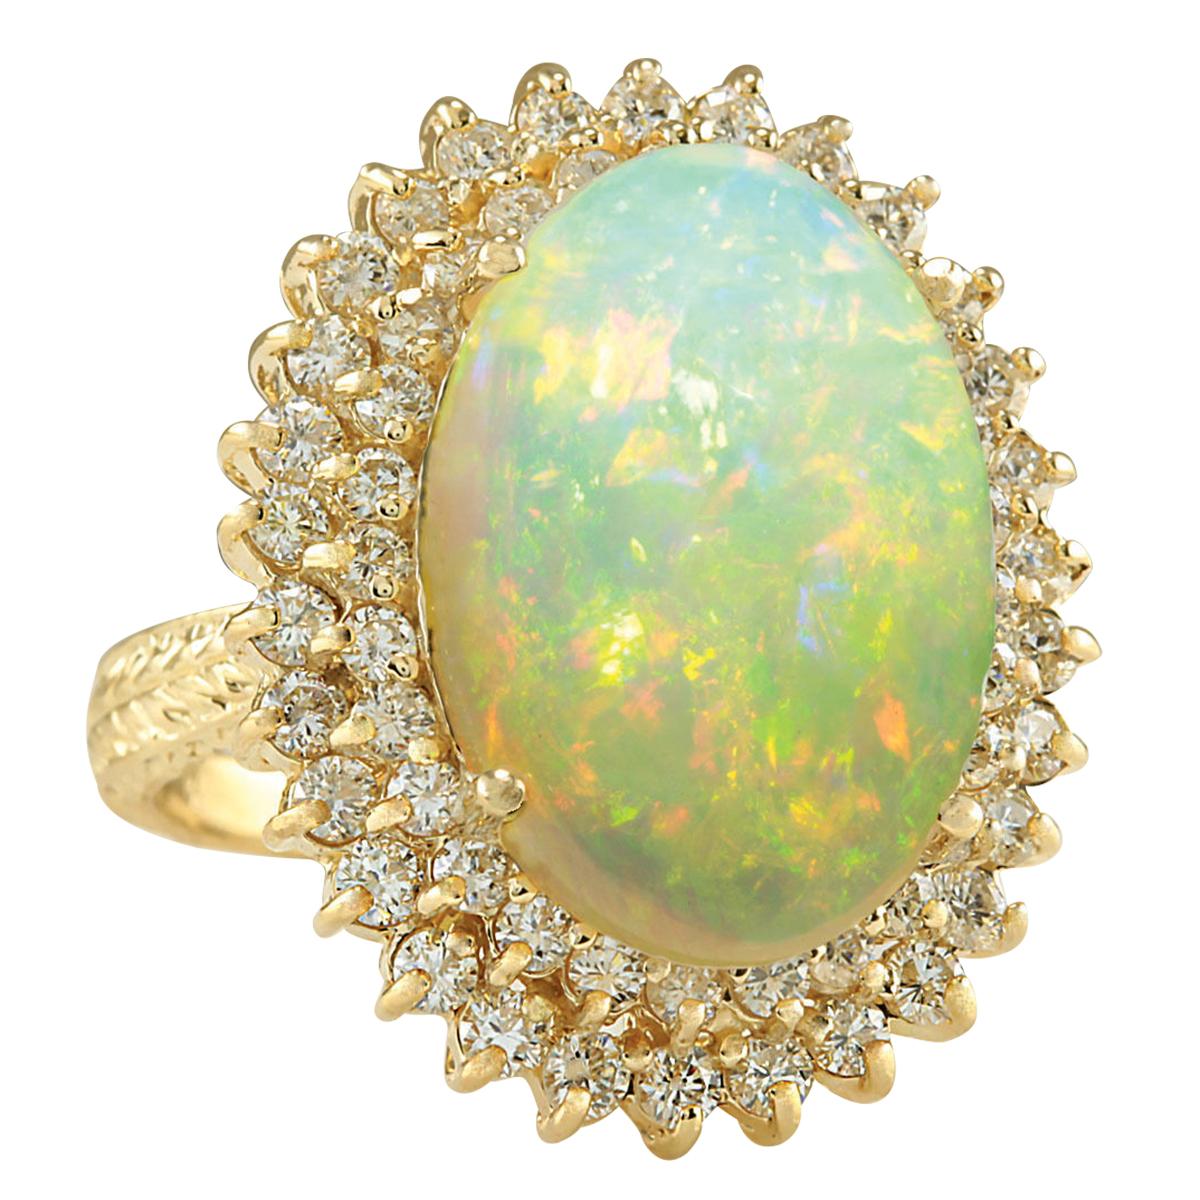 Stamped: 14K Yellow Gold
Total Ring Weight: 10.5 Grams
Total Natural Opal Weight is 8.78 Carat (Measures: 18.00x13.00 mm)
Color: Multicolor
Total Natural Diamond Weight is 1.60 Carat
Color: F-G, Clarity: VS2-SI1
Face Measures: 26.55x21.25 mm
Sku: